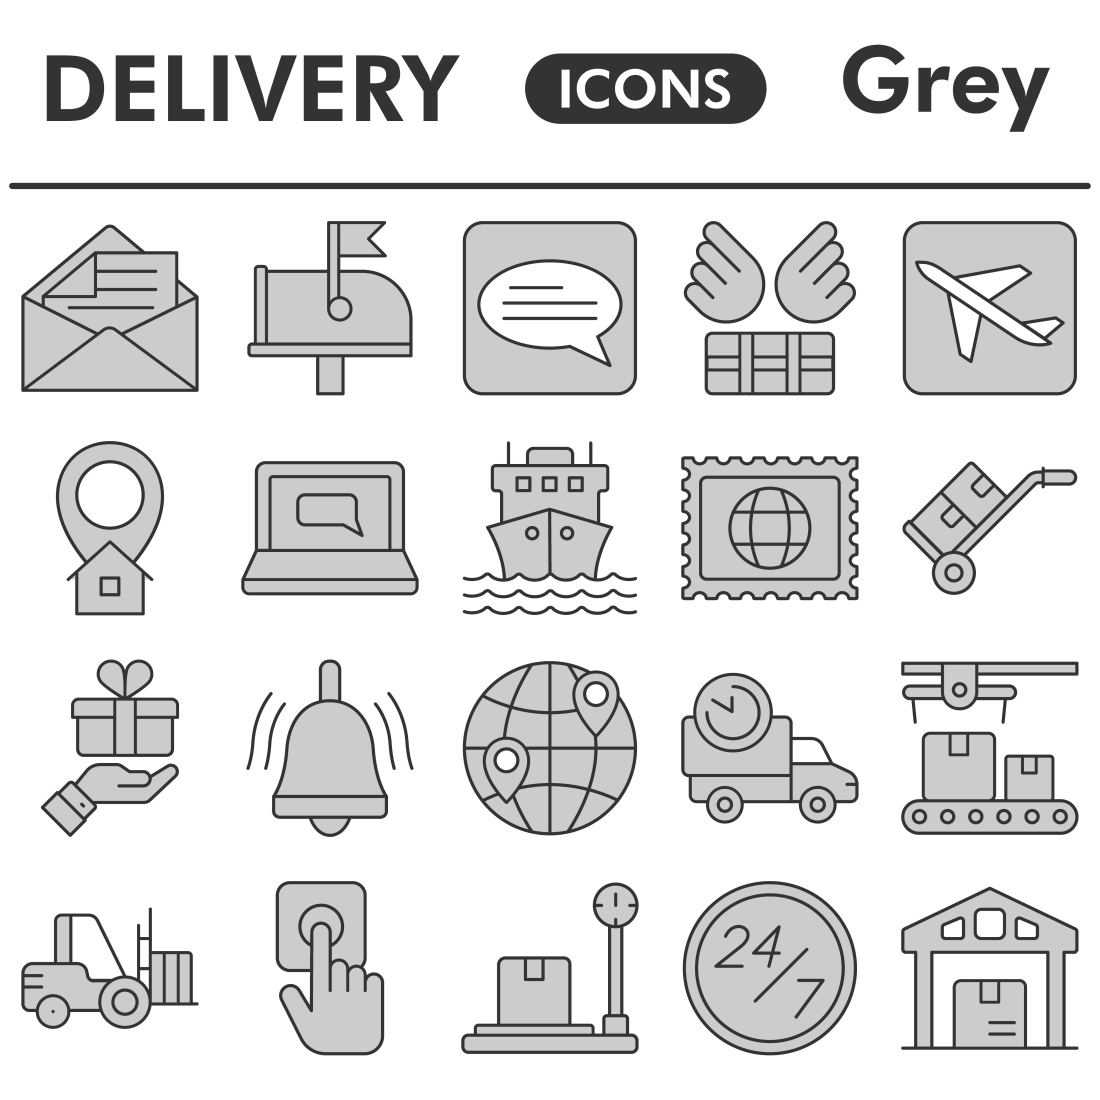 Delivery icons set, gray style preview image.